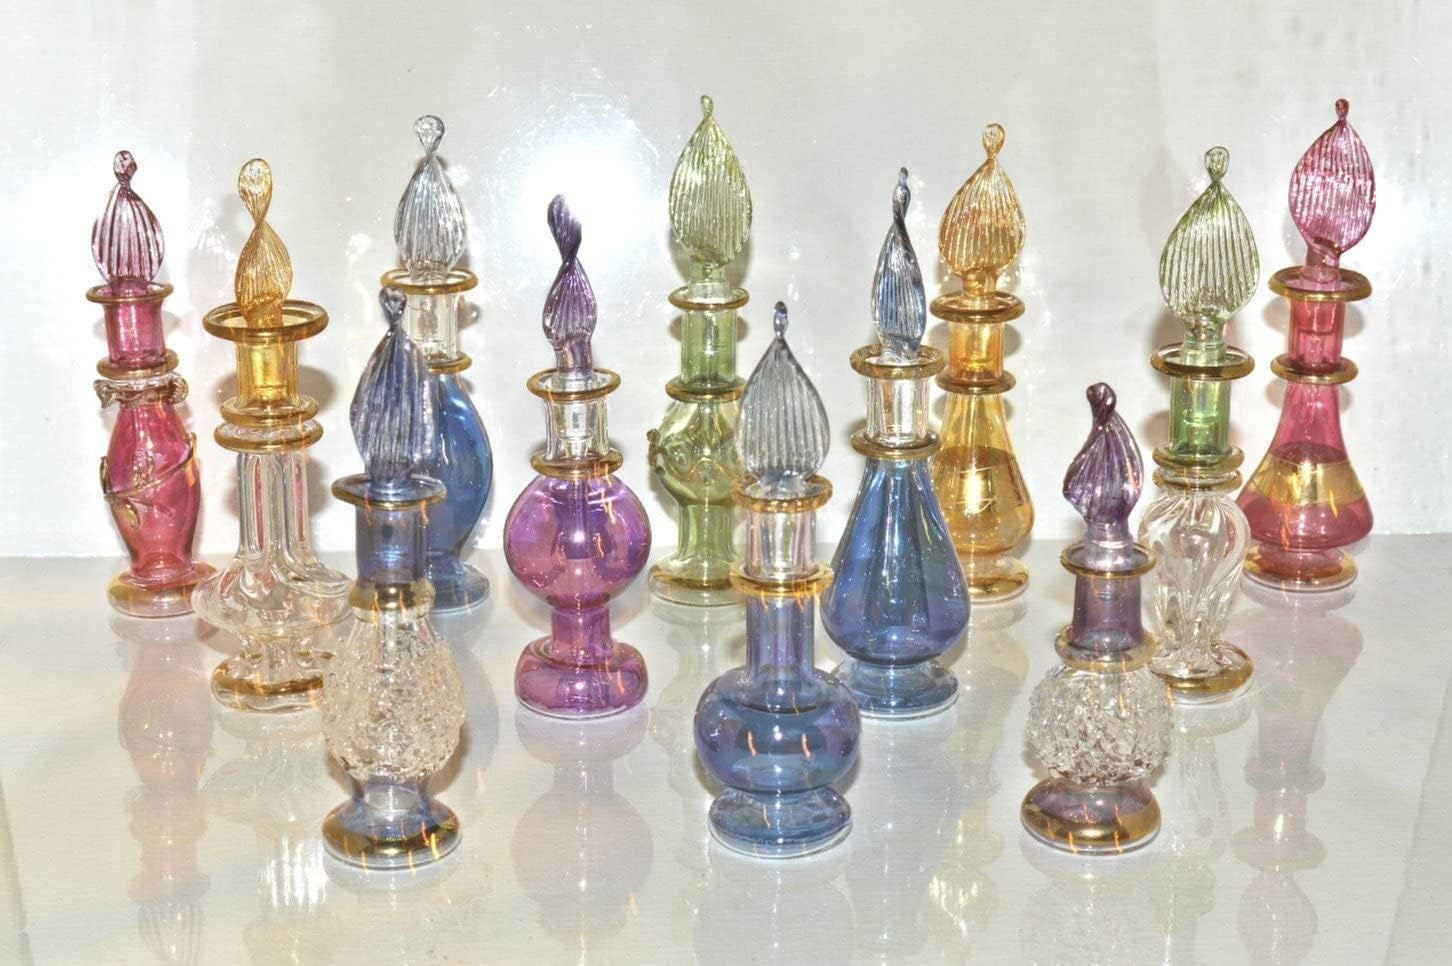 Lot of 6 Tiny Mouth Blown Egyptian Perfume Bottles Glass